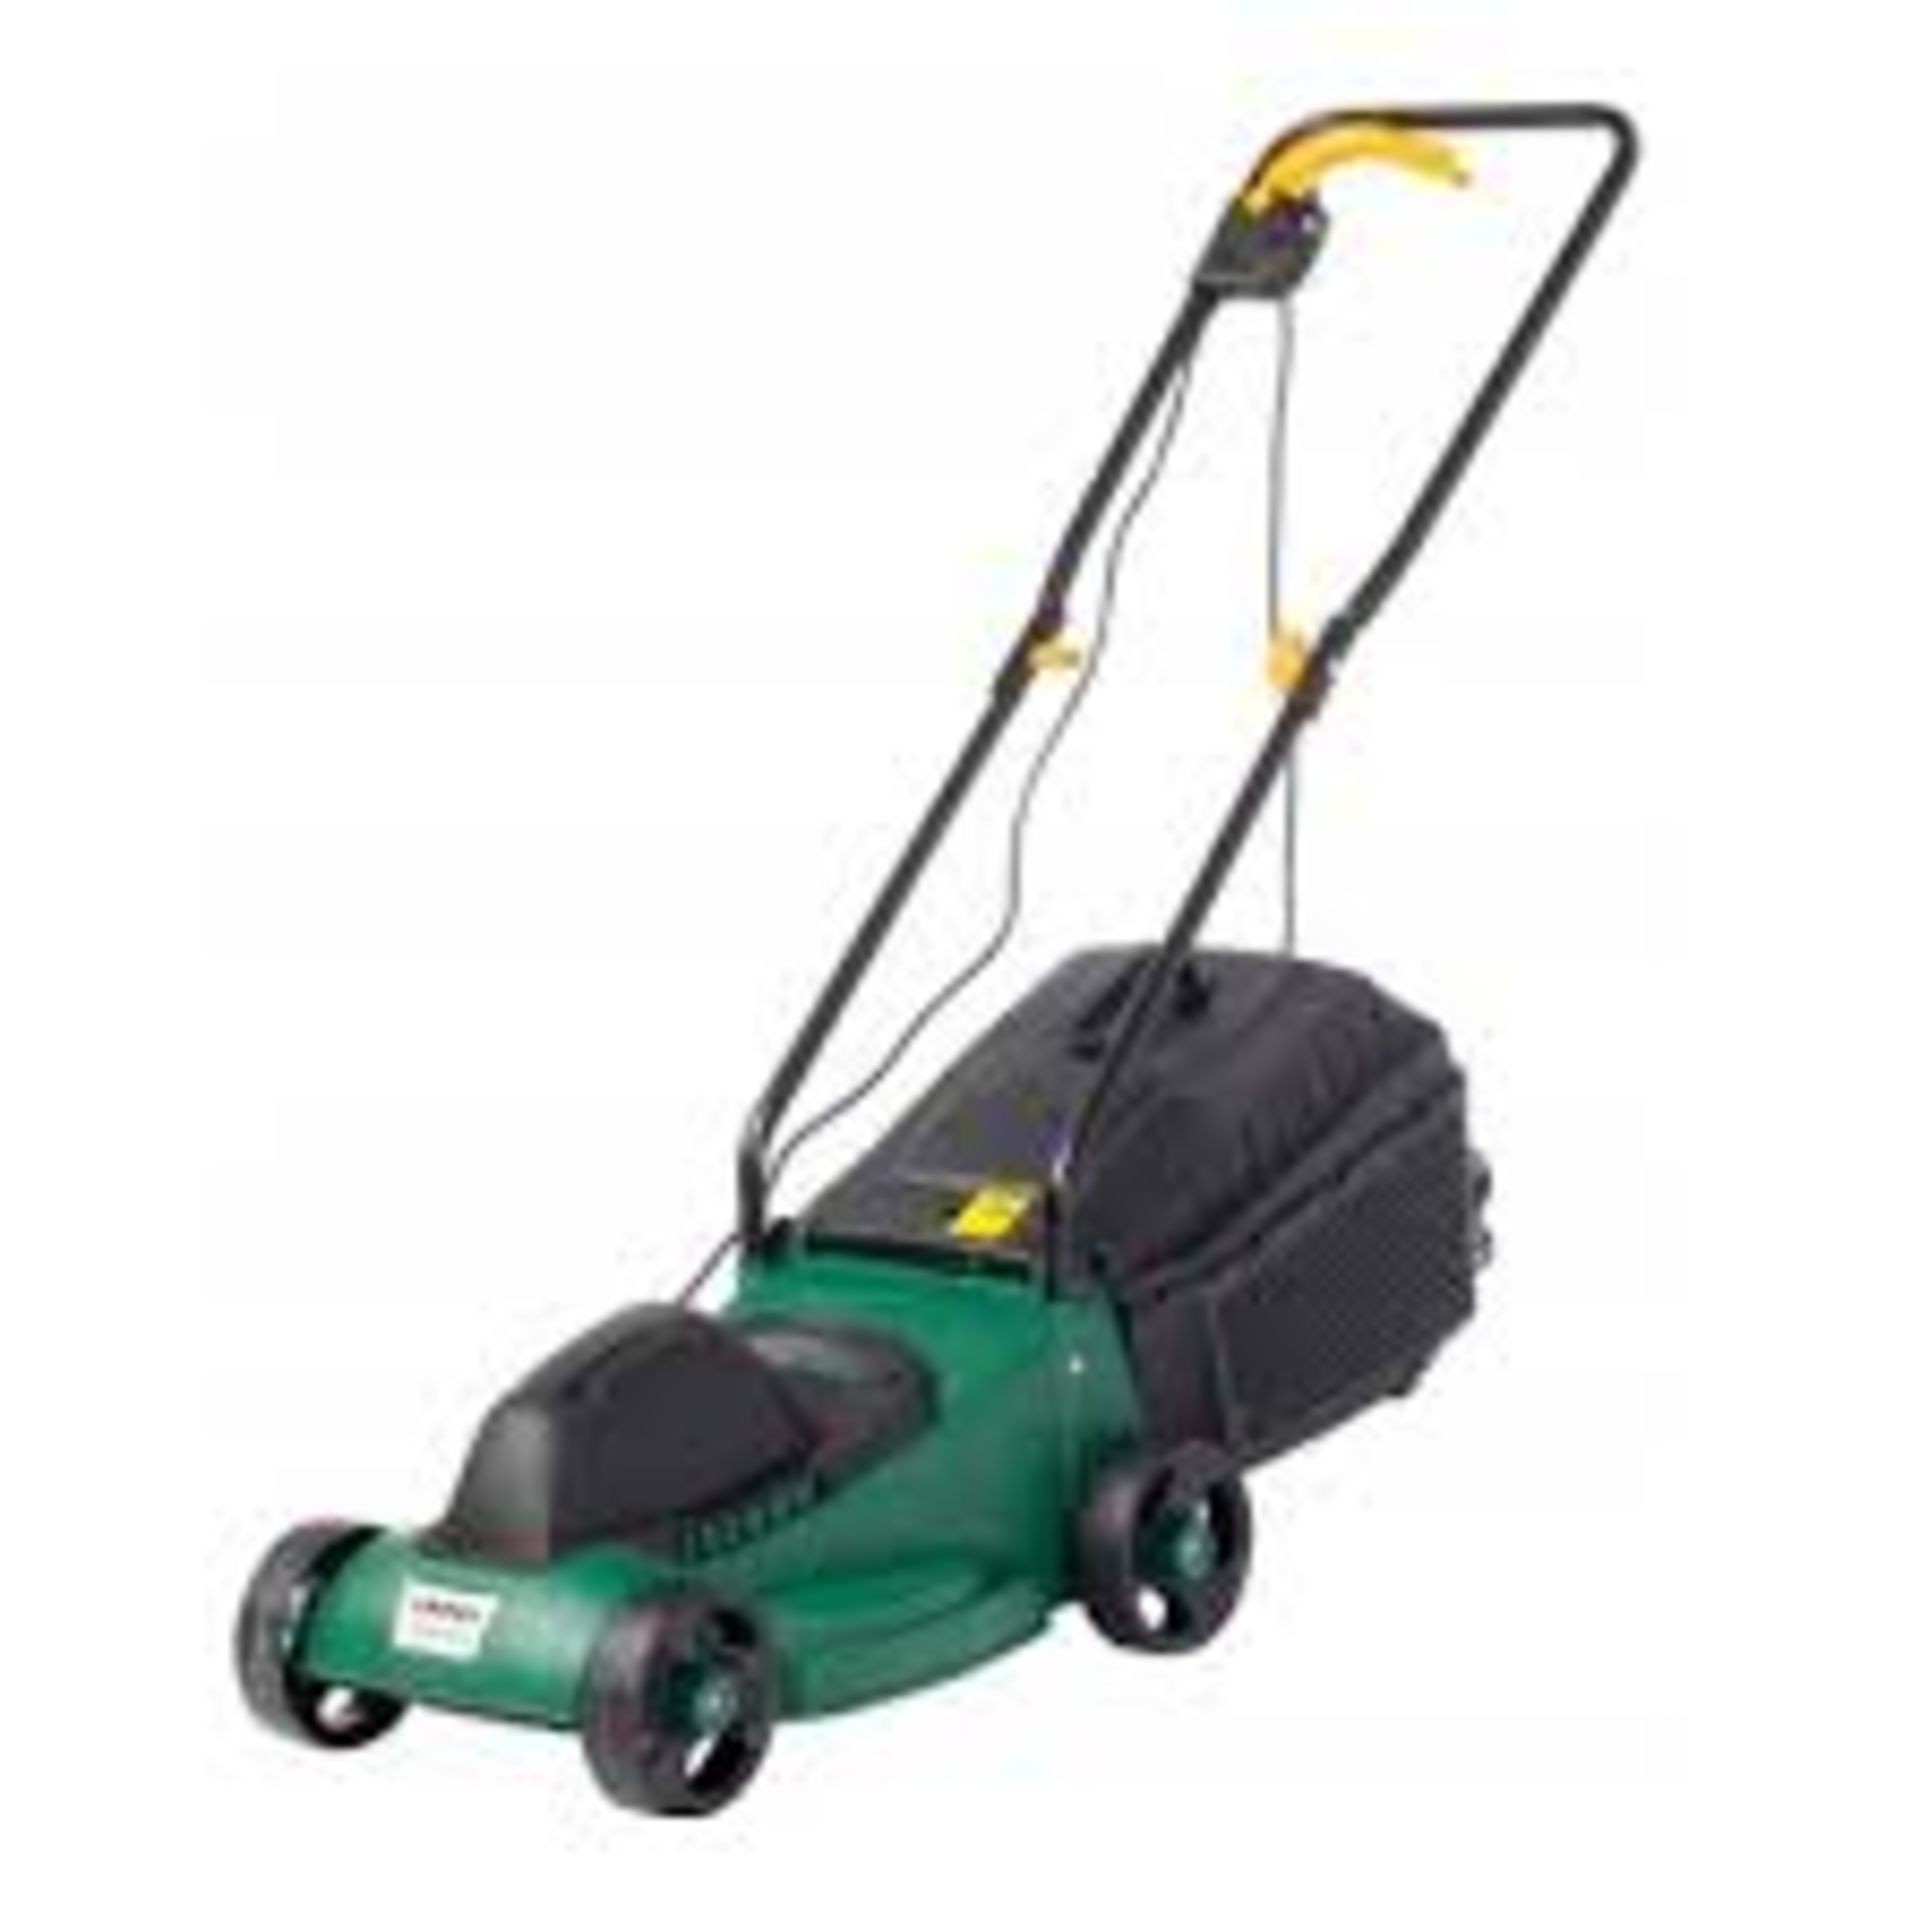 NMLM1000-4 Corded Rotary Lawnmower. - PW.